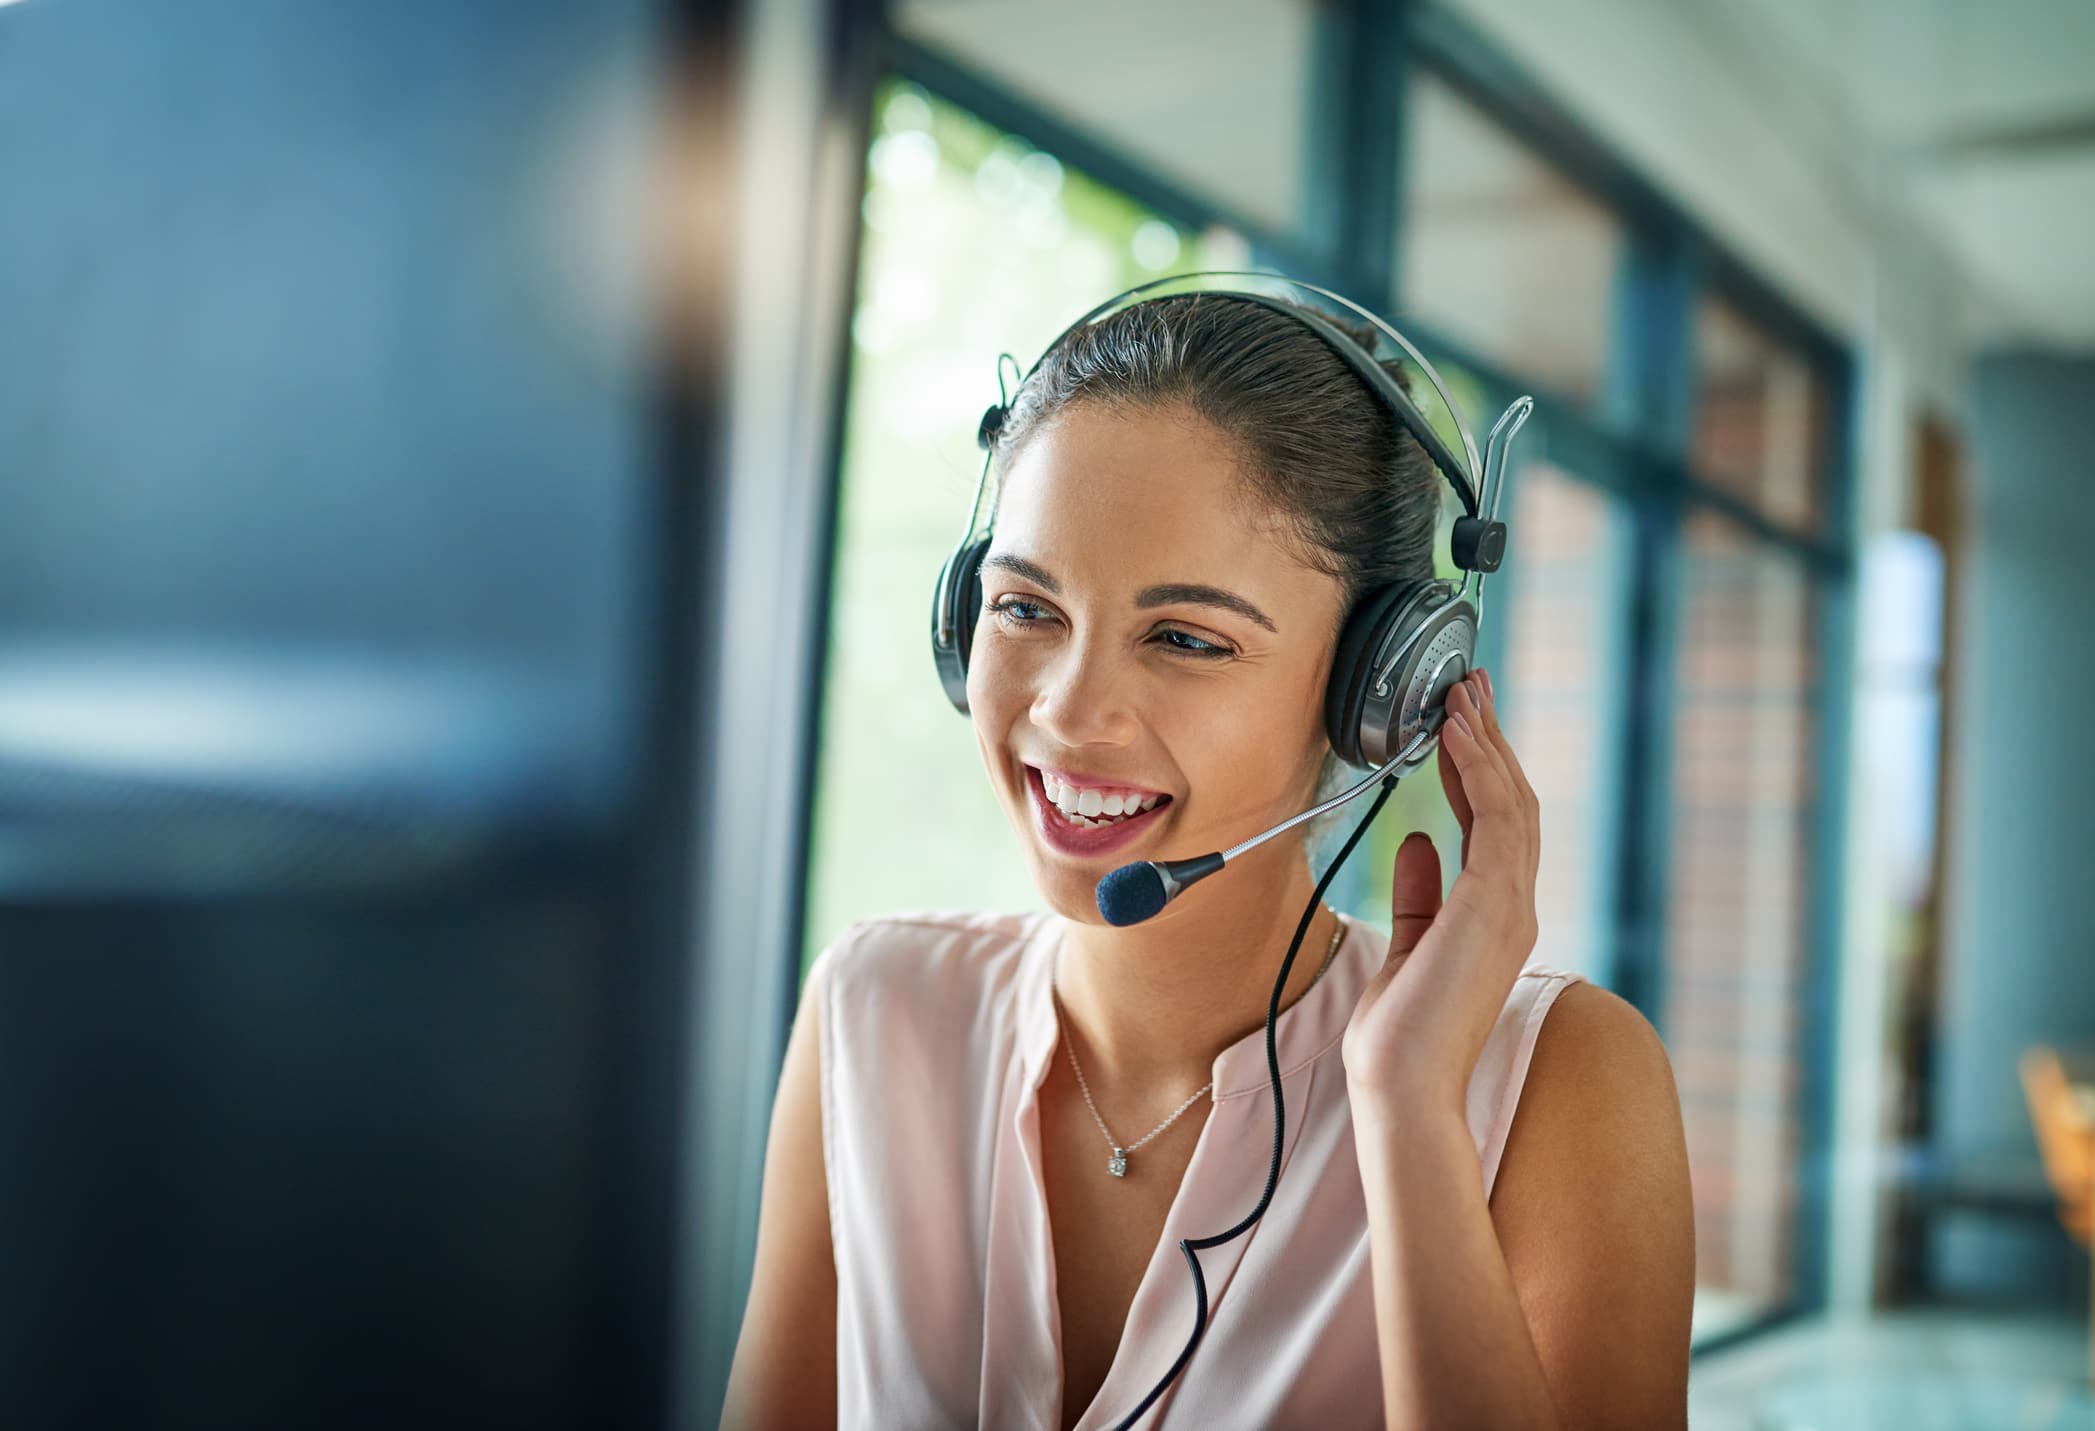 Shot of a young woman working in a call center